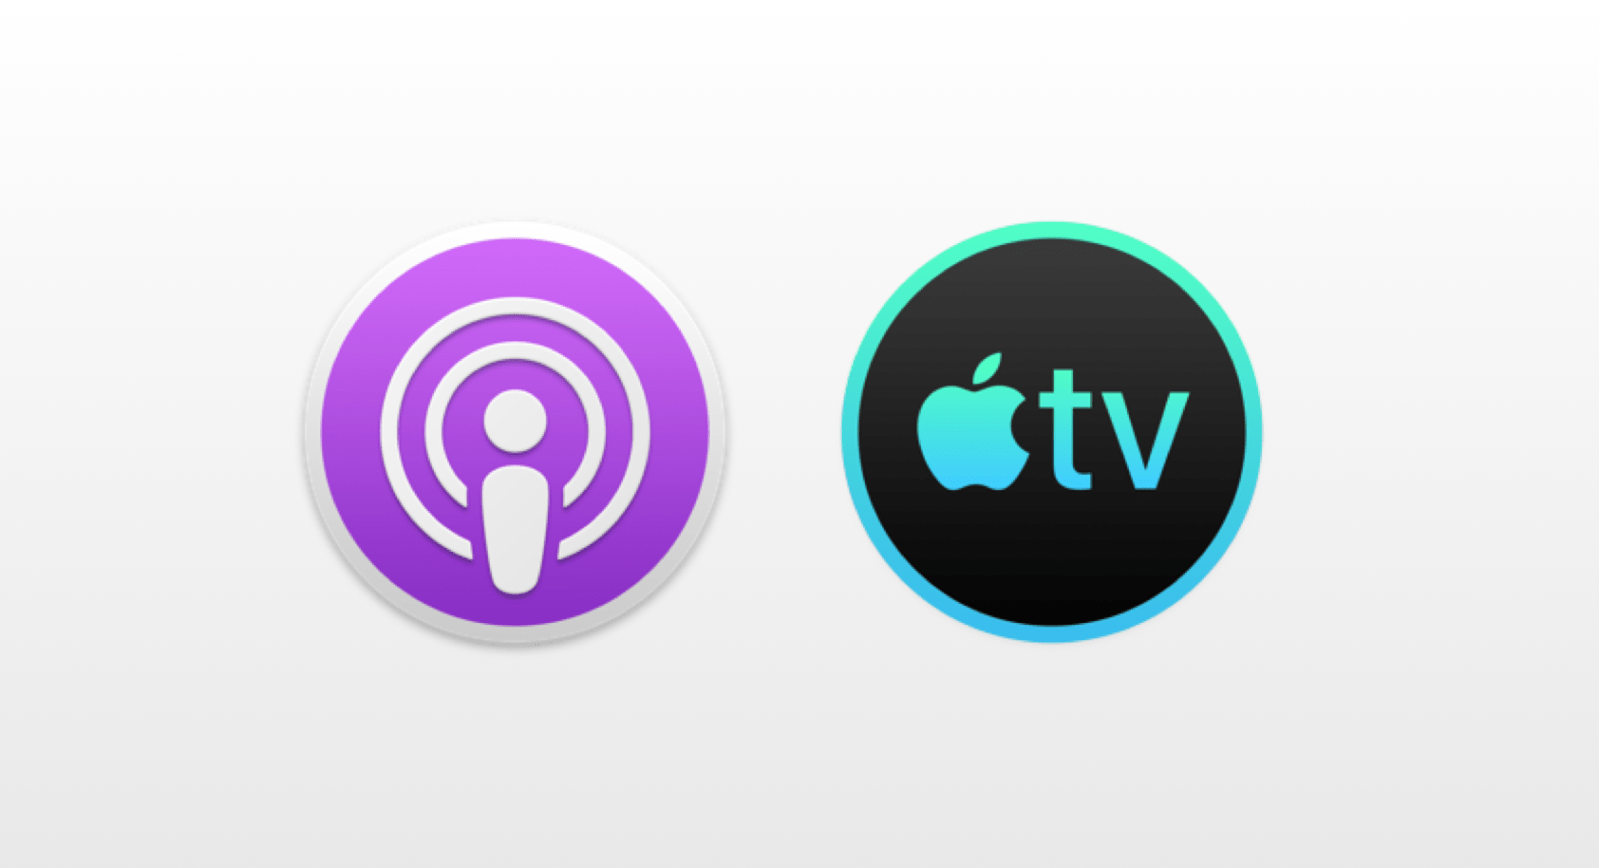 Does the Mac Podcasts app exist as an option? 9to5Mac